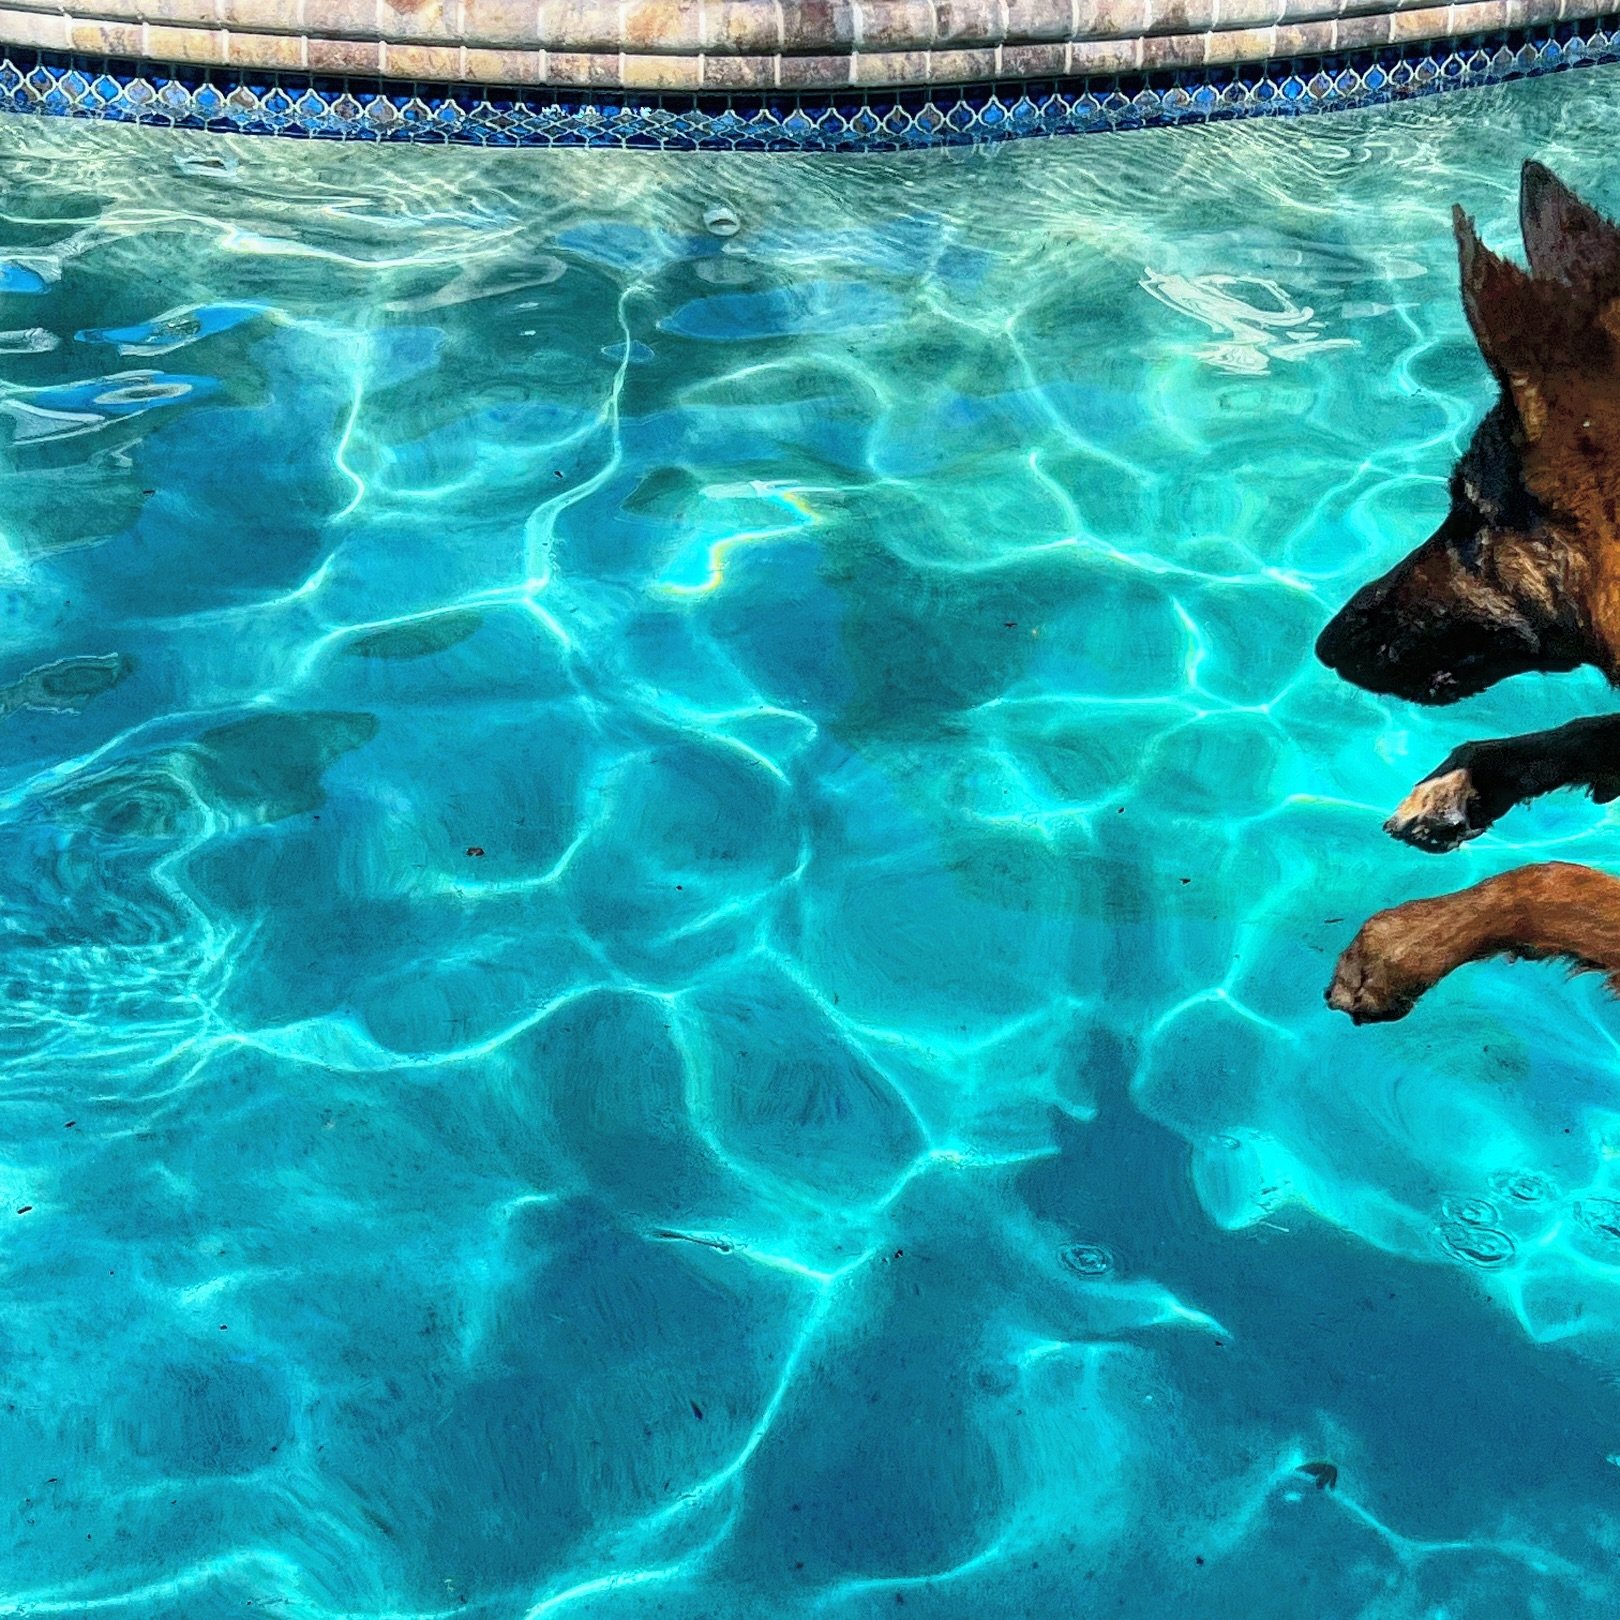 Diving into #almostfriday 🩵🤿🐬💦

We have some swim spots open for tomorrow &amp; Sunday🌀so take advantage of the beautiful weather coming this weekend and keep cool in our pool😎

💻DIPNDOGS.com
📲(407)227-0030
📧Rachel@dipndogs.com